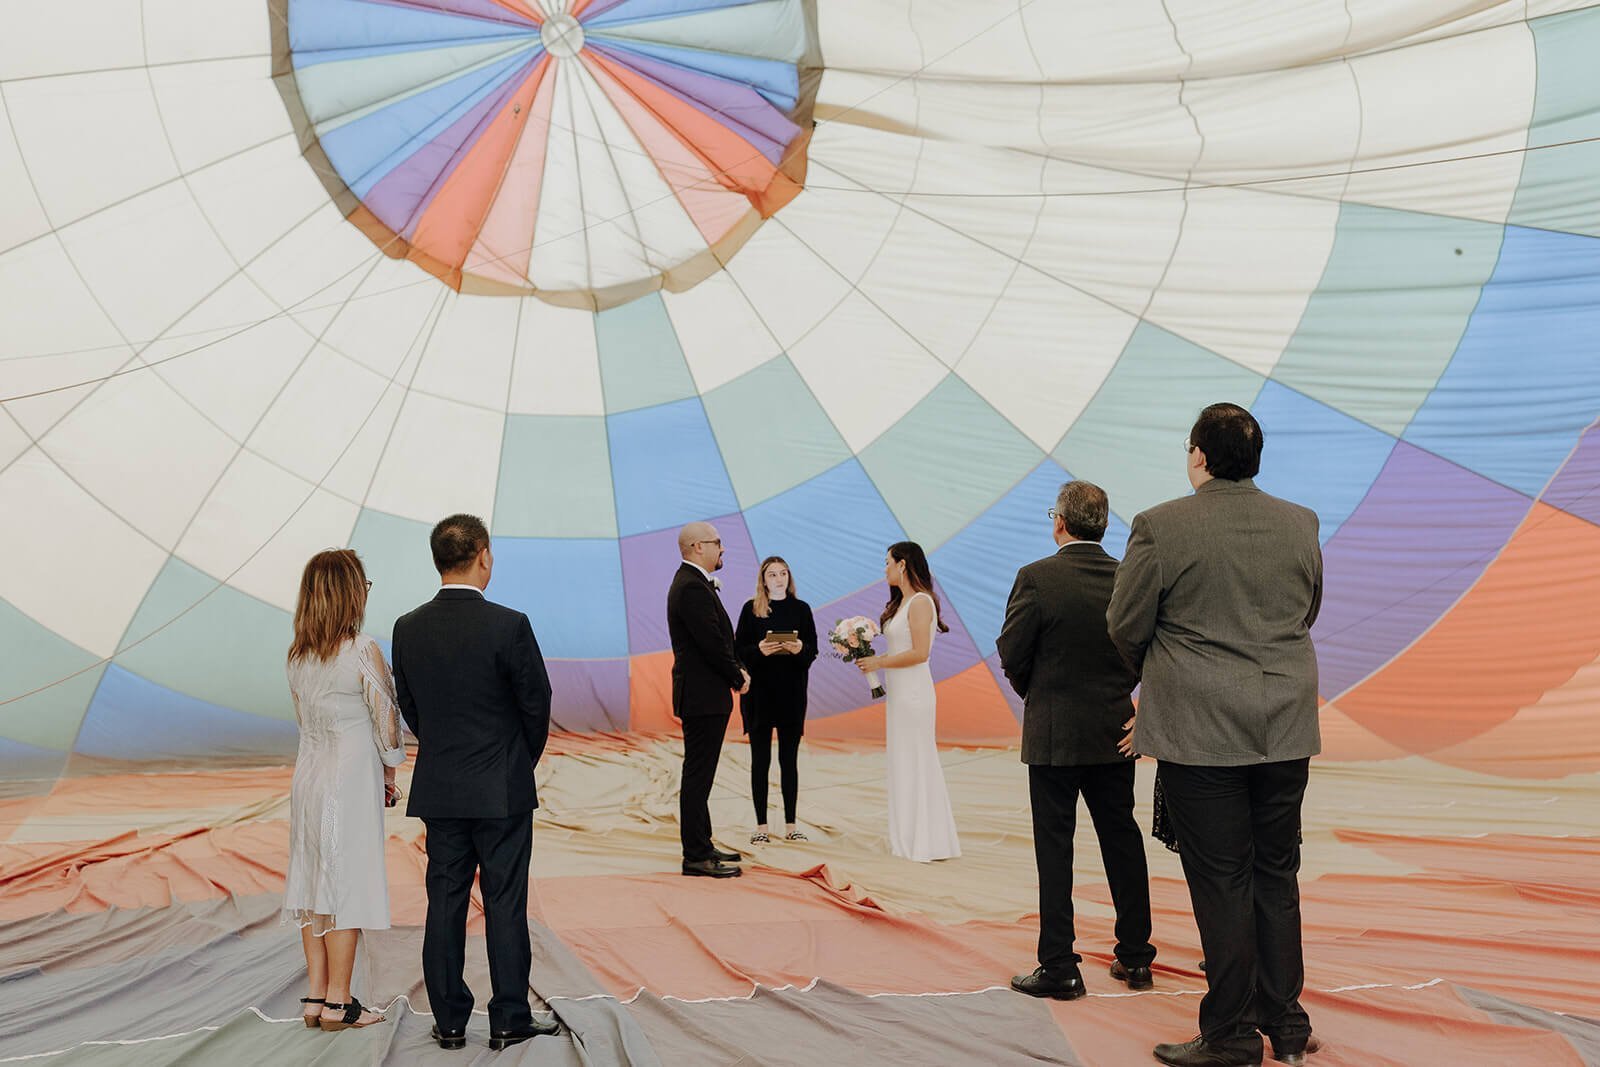 Intimate wedding ceremony inside a hot air balloon